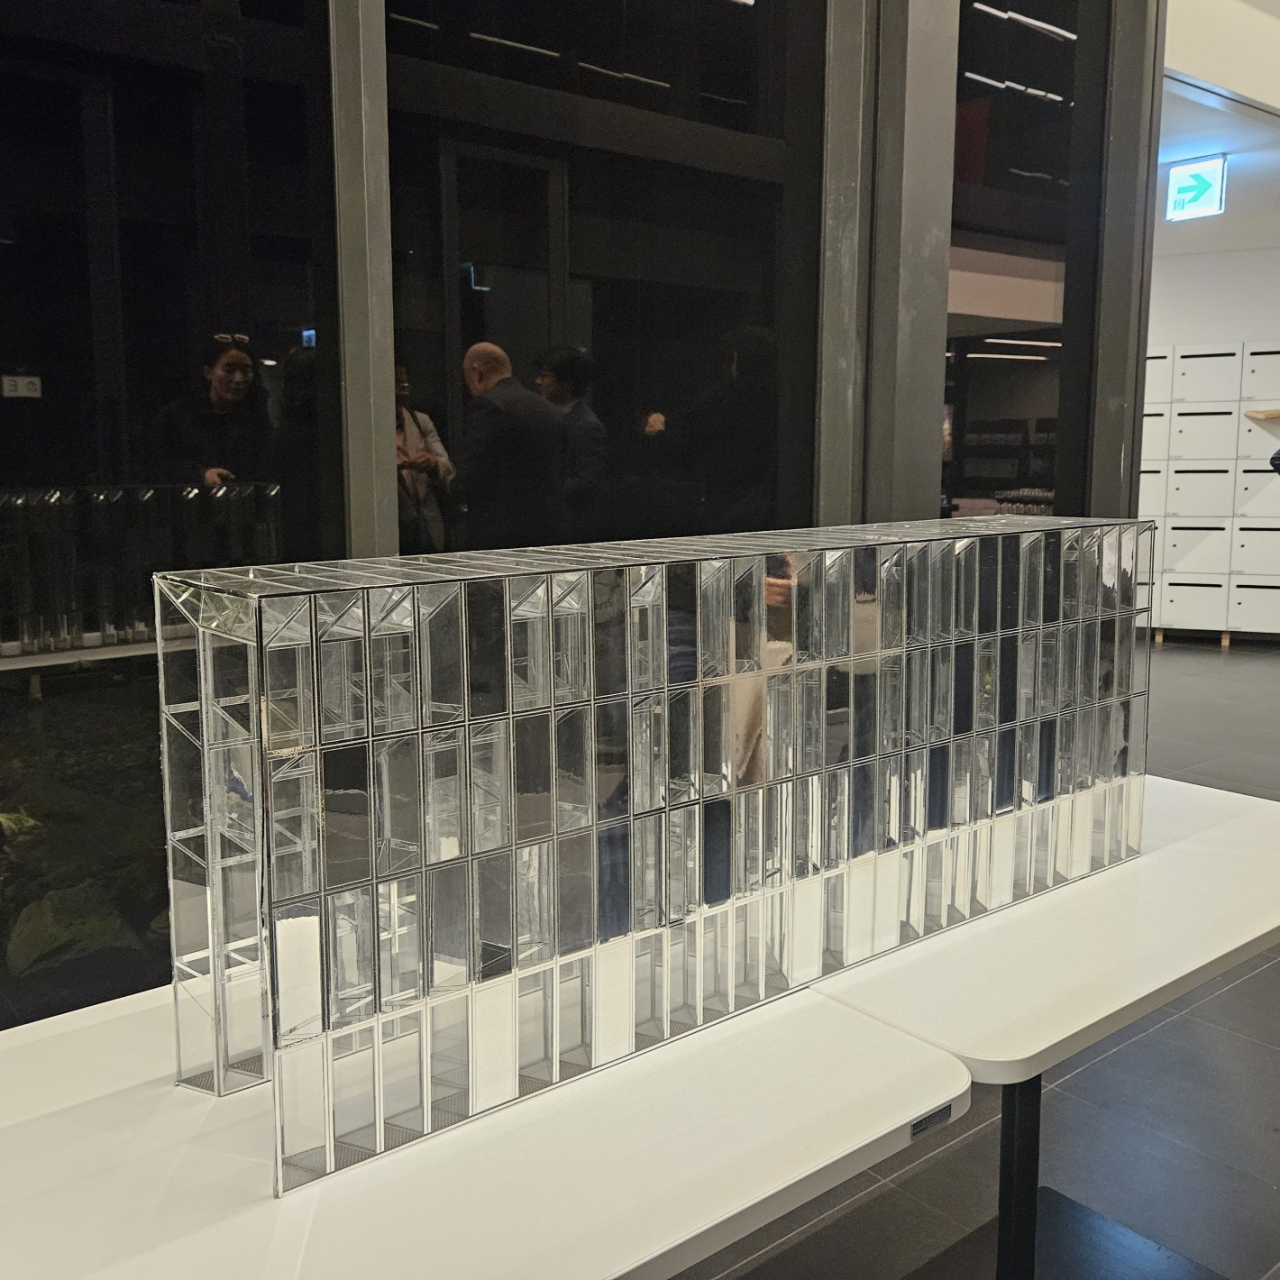 An architectural model of the Lightwalk project by architect Dominique Perrault is on display at the French Embassy in Seoul. (Park Yuna/The Korea Herald)